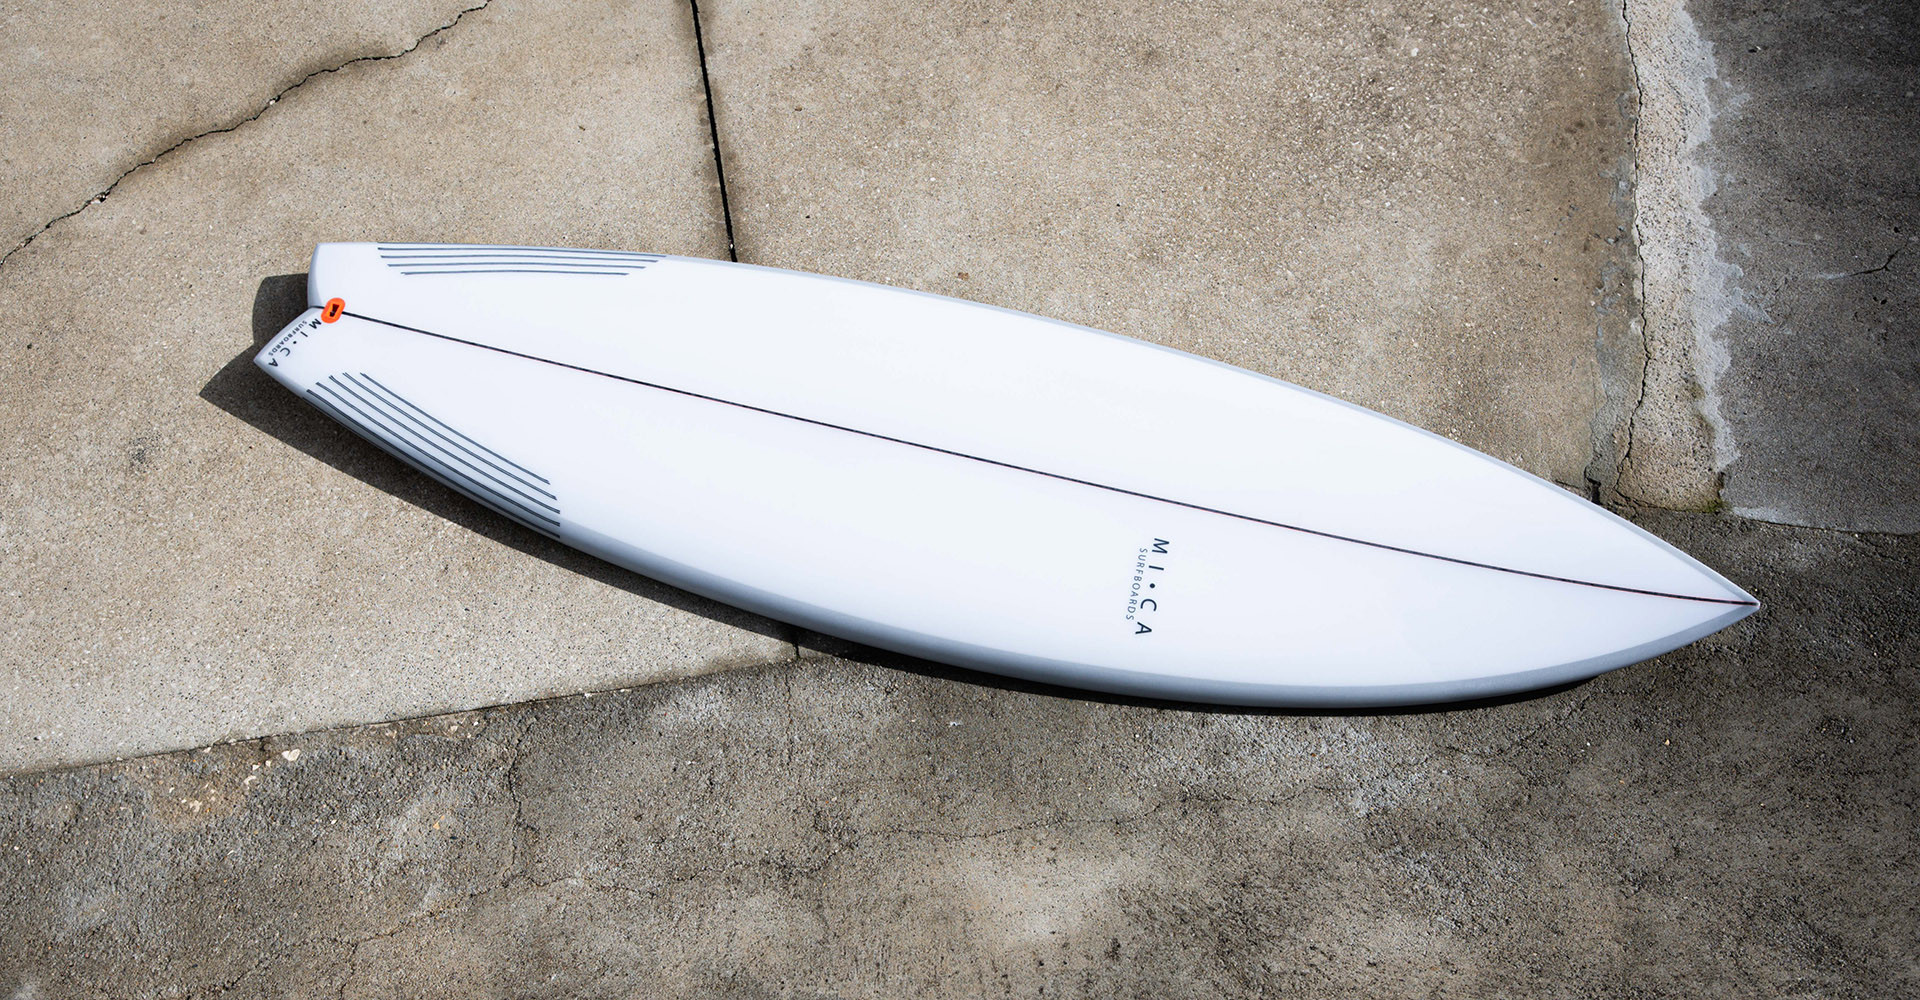 high performance surfboards custom surfboards swallow tail